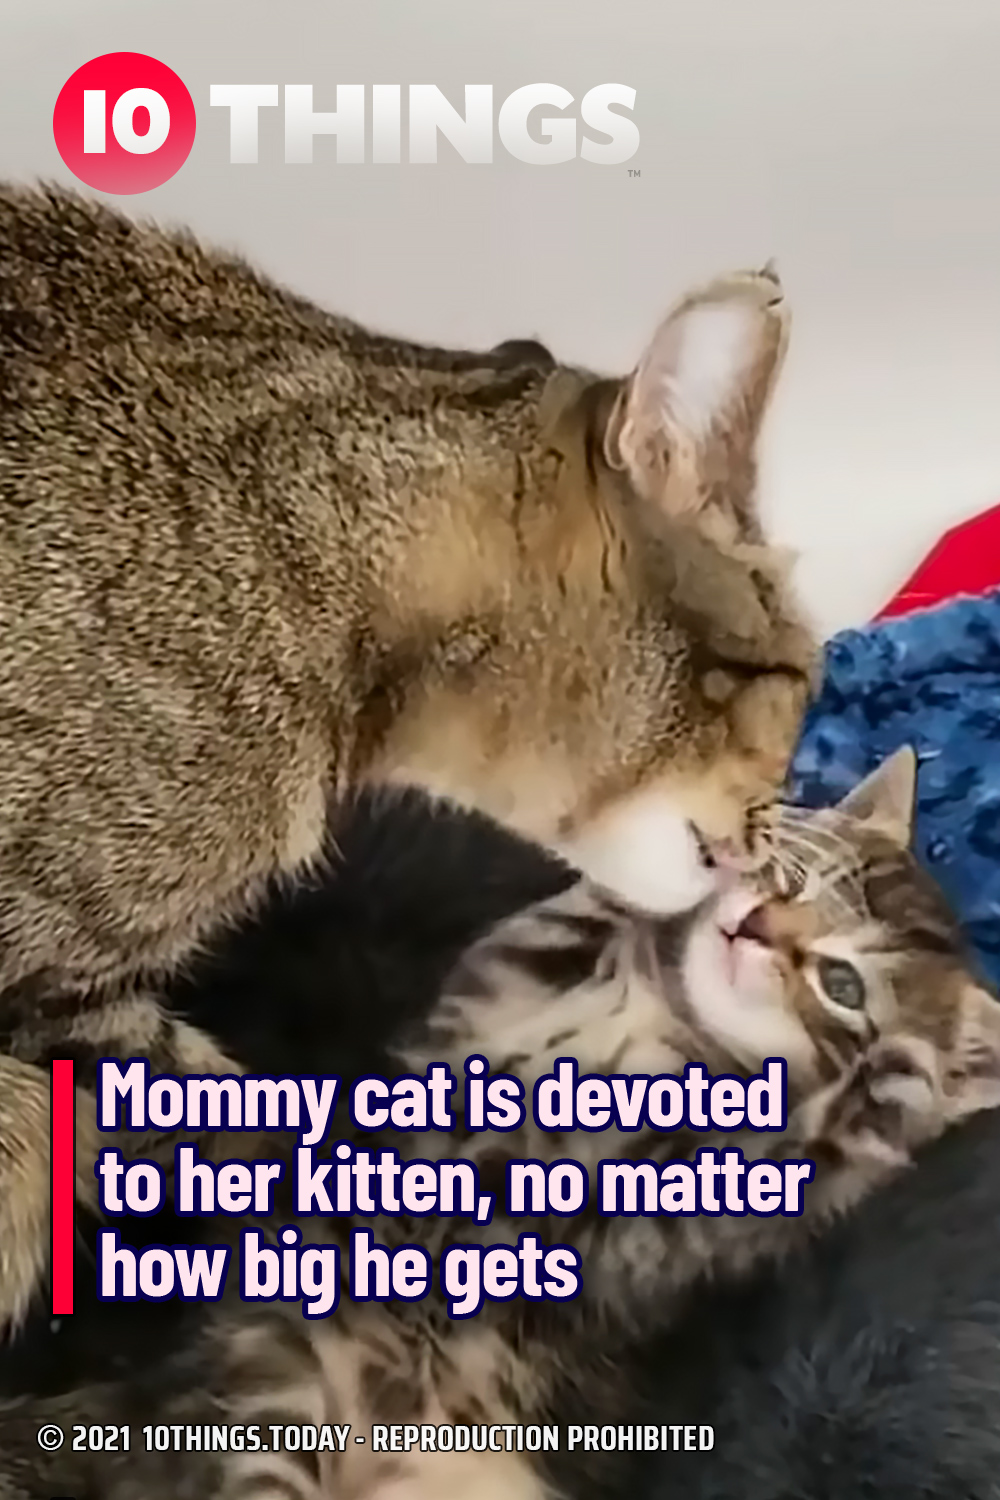 Mommy cat is devoted to her kitten, no matter how big he gets